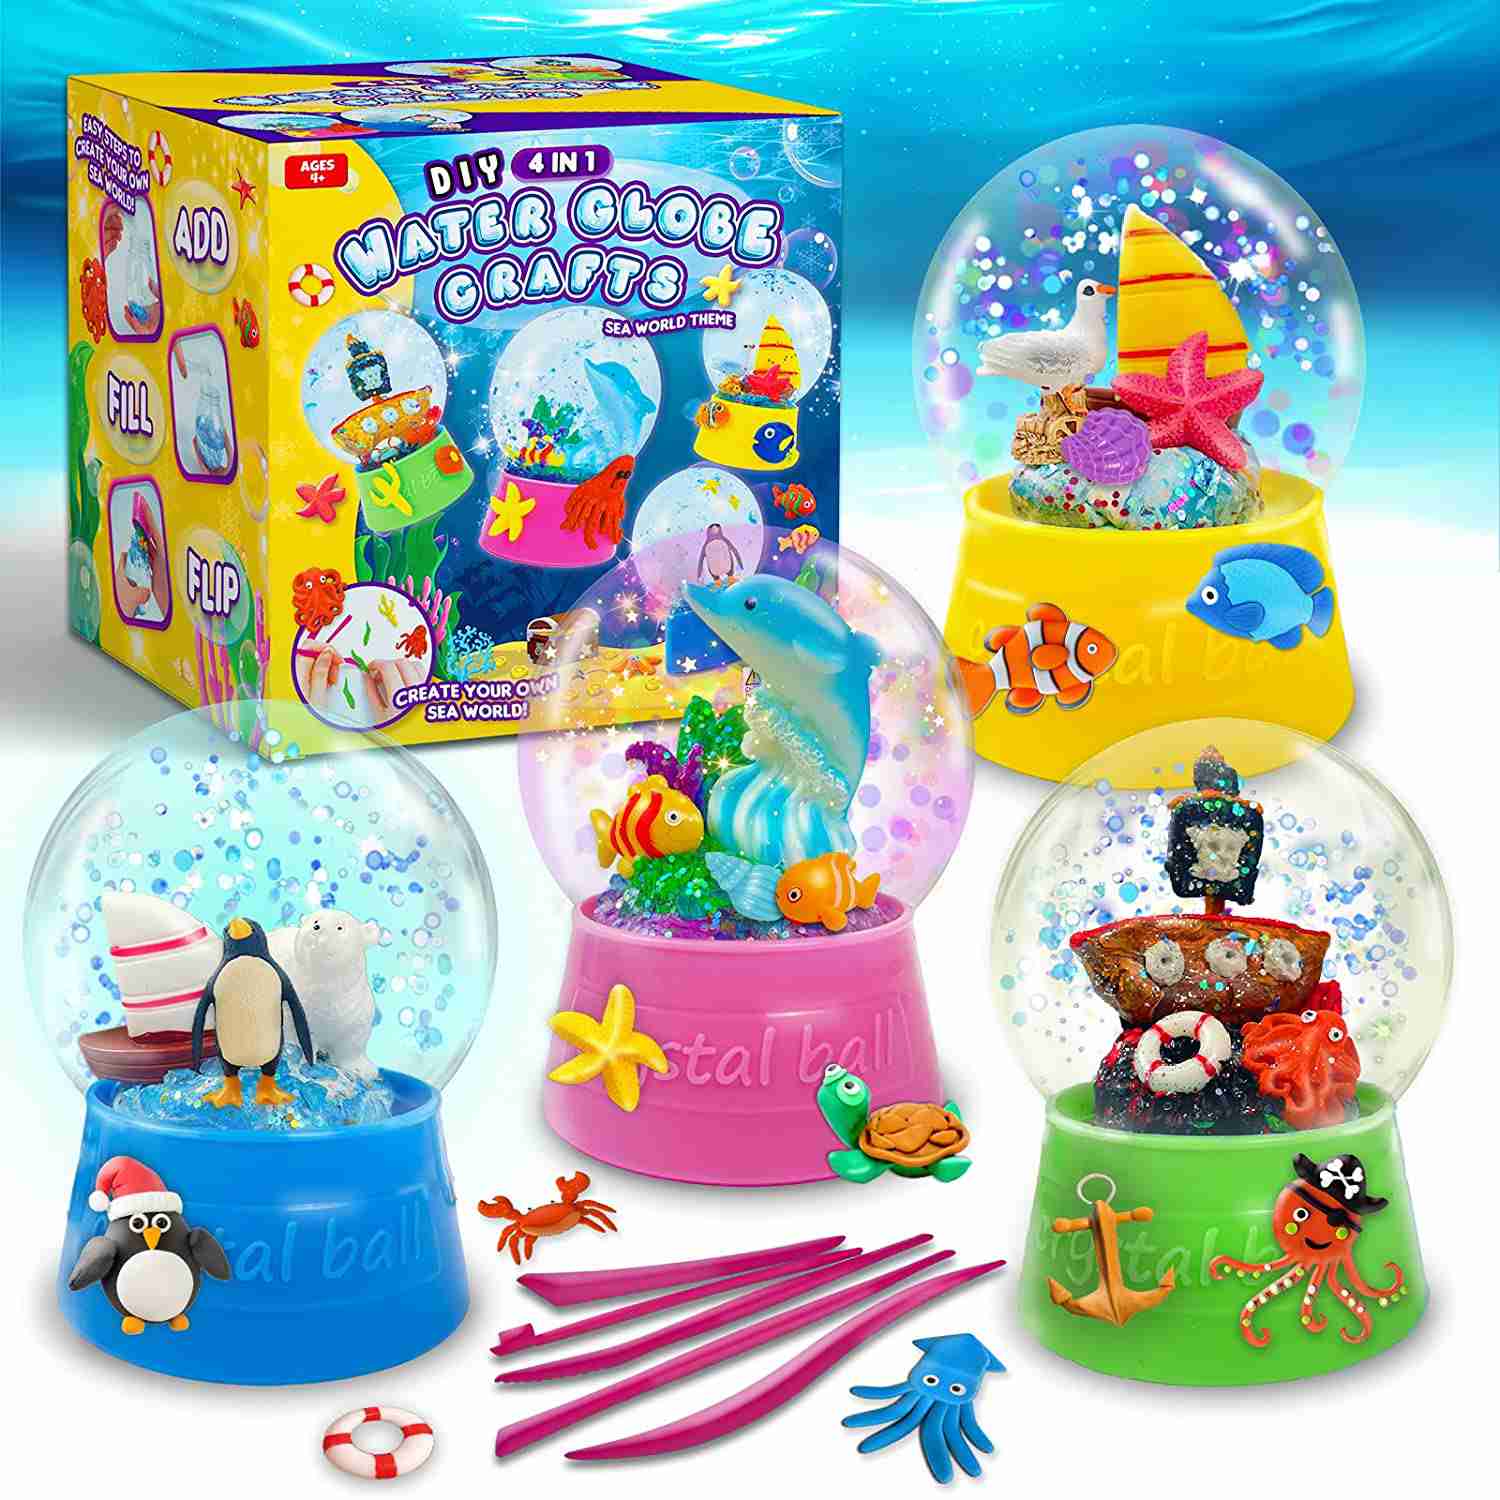 make-your-own-water-globe with cash back rebate